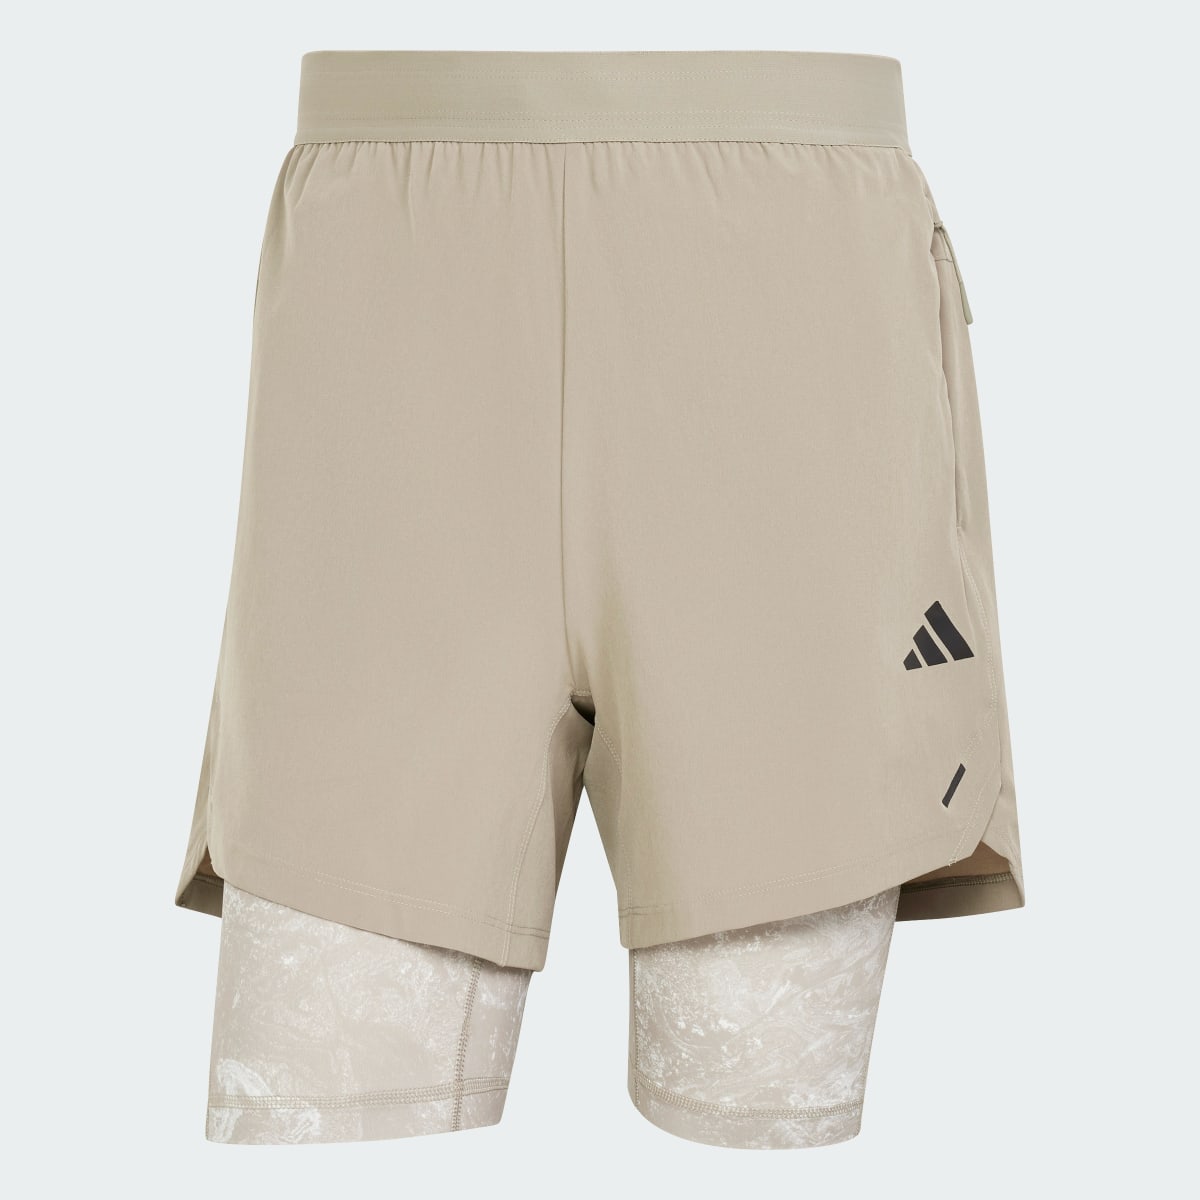 Adidas Power Workout 2-in-1 Shorts. 4